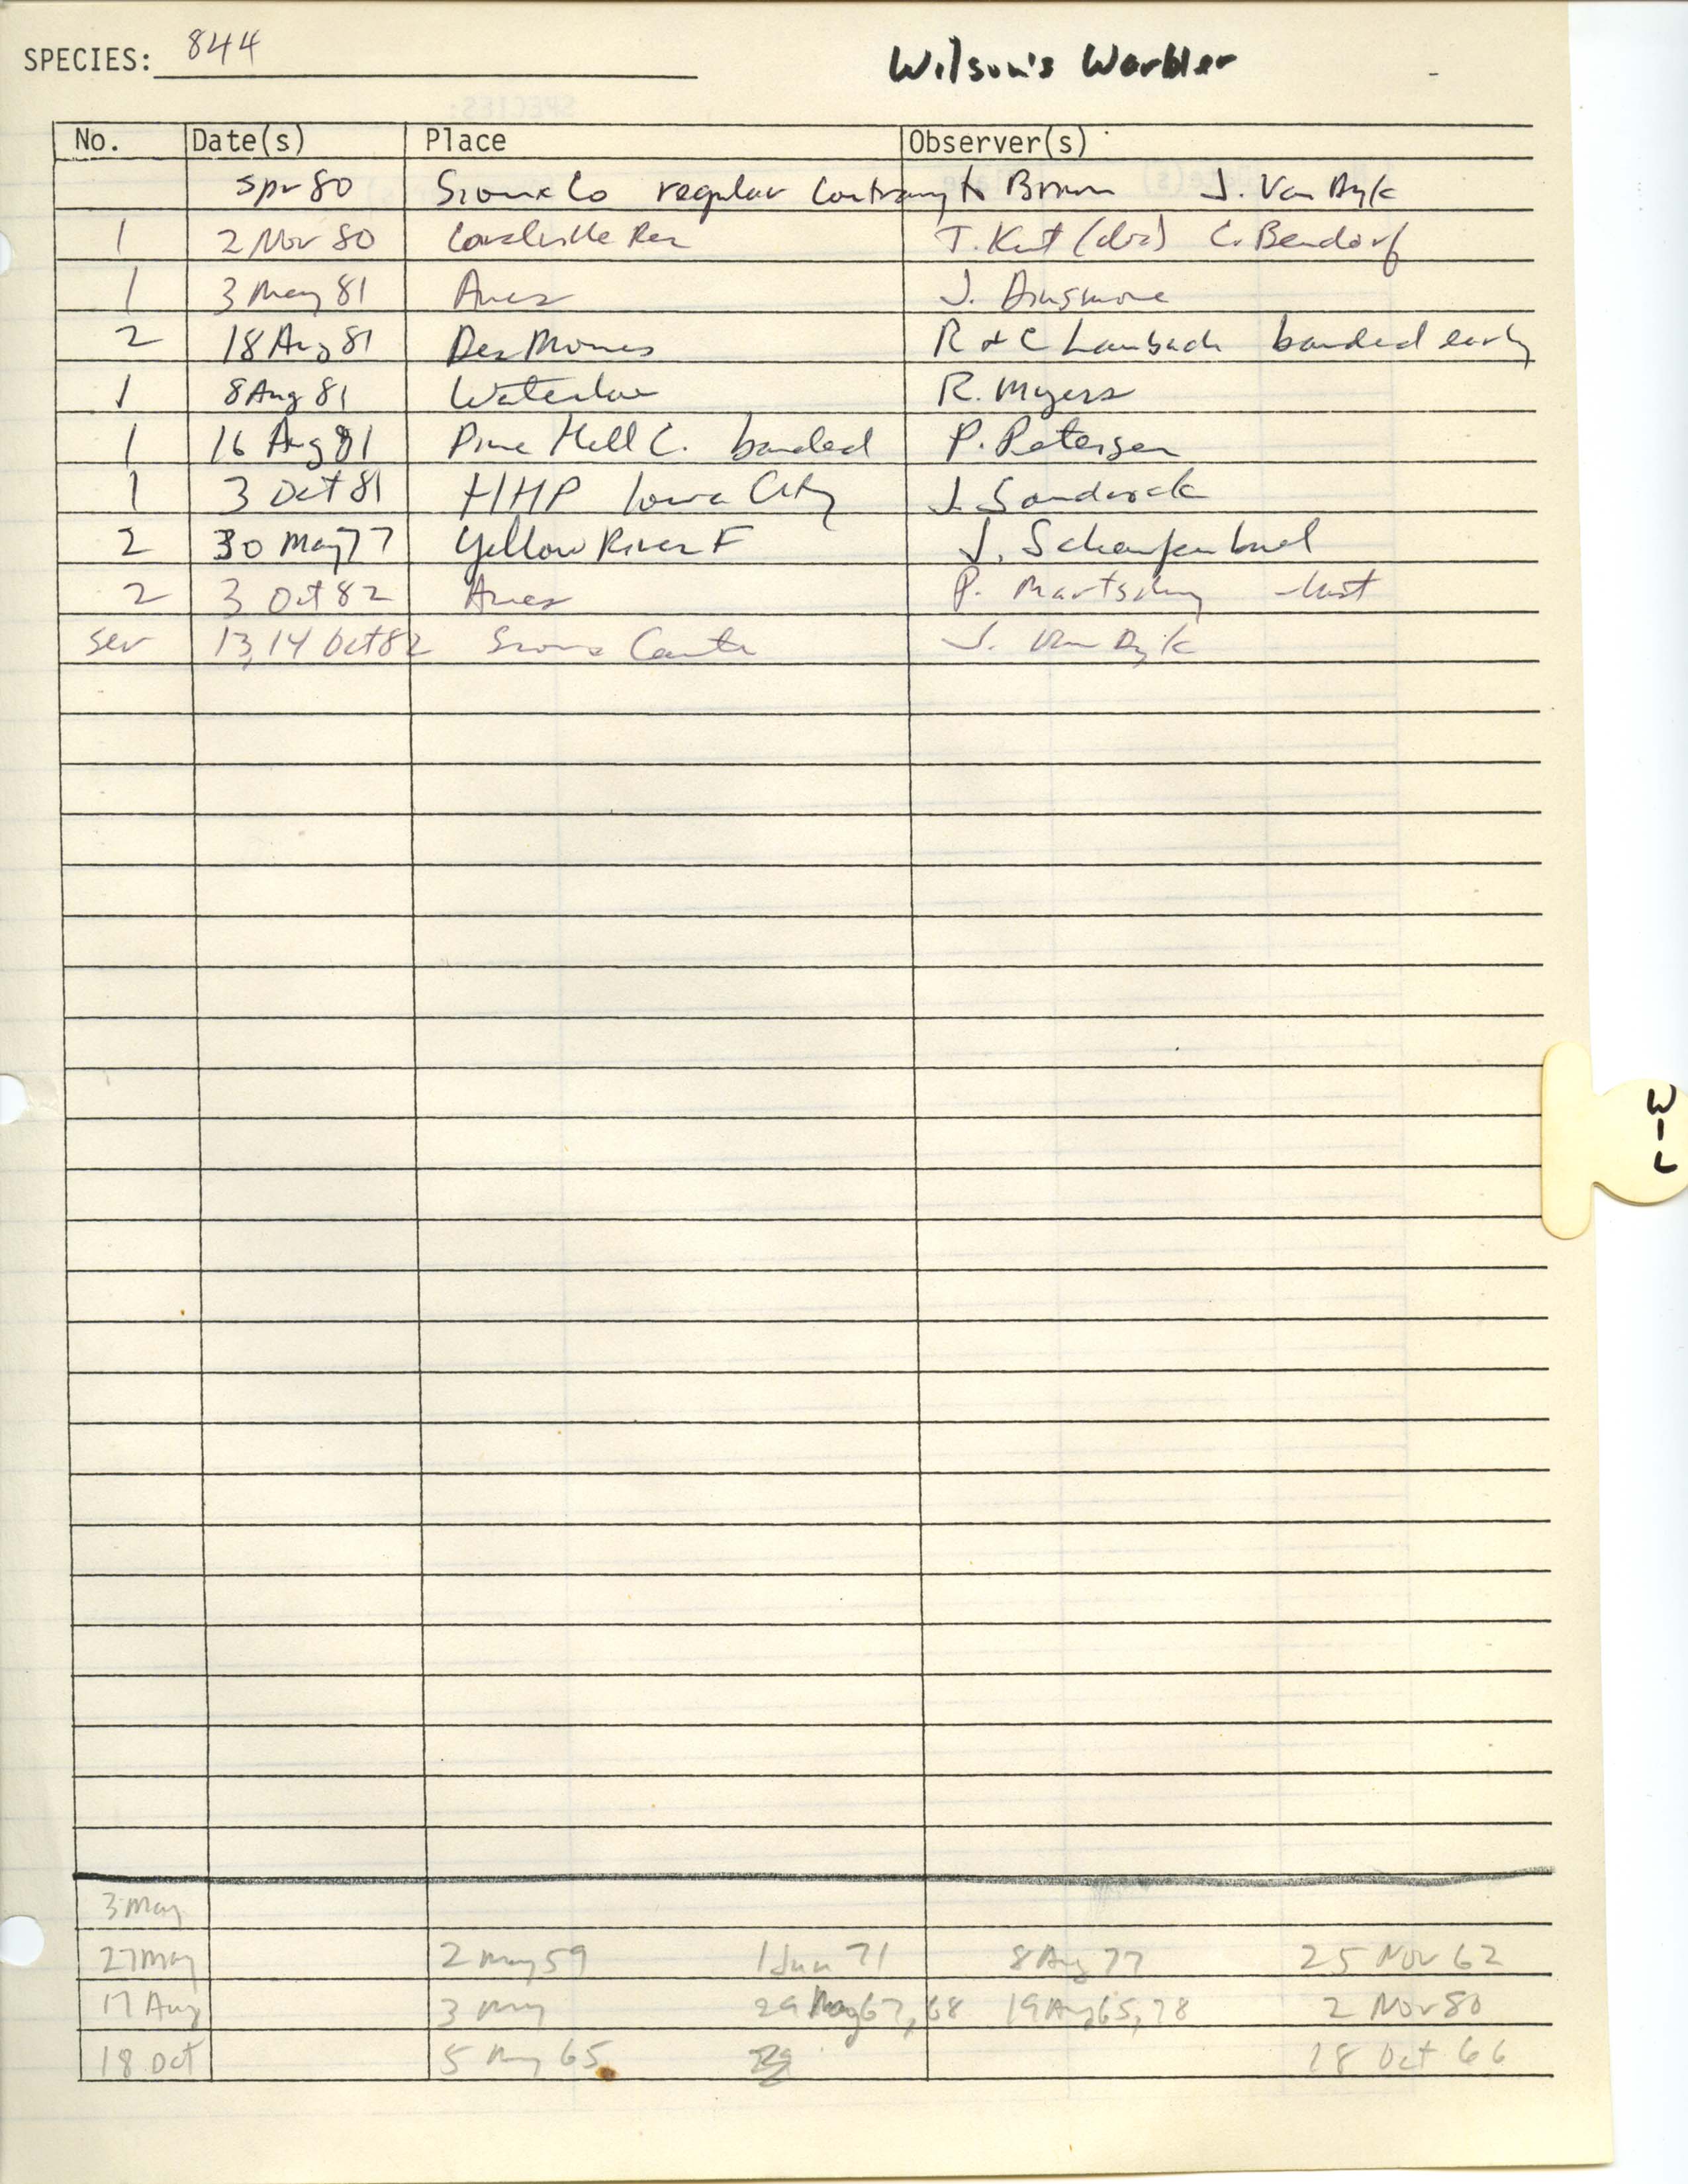 Iowa Ornithologists' Union, field report compiled data, Wilson's Warbler, 1977-1982